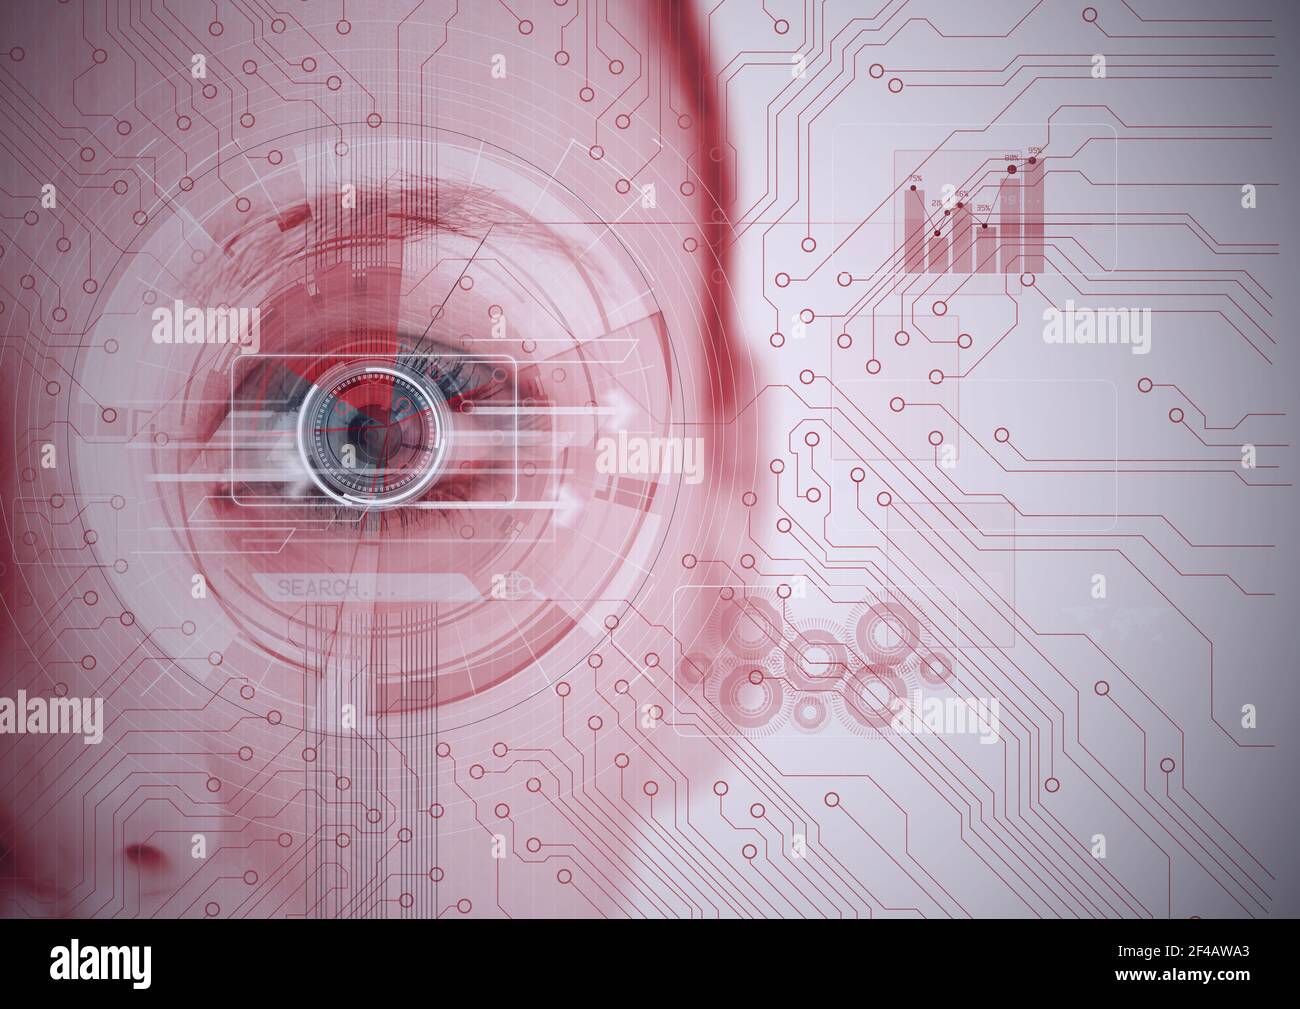 Round scanner and microprocessor connections against close up of female human eye Stock Photo